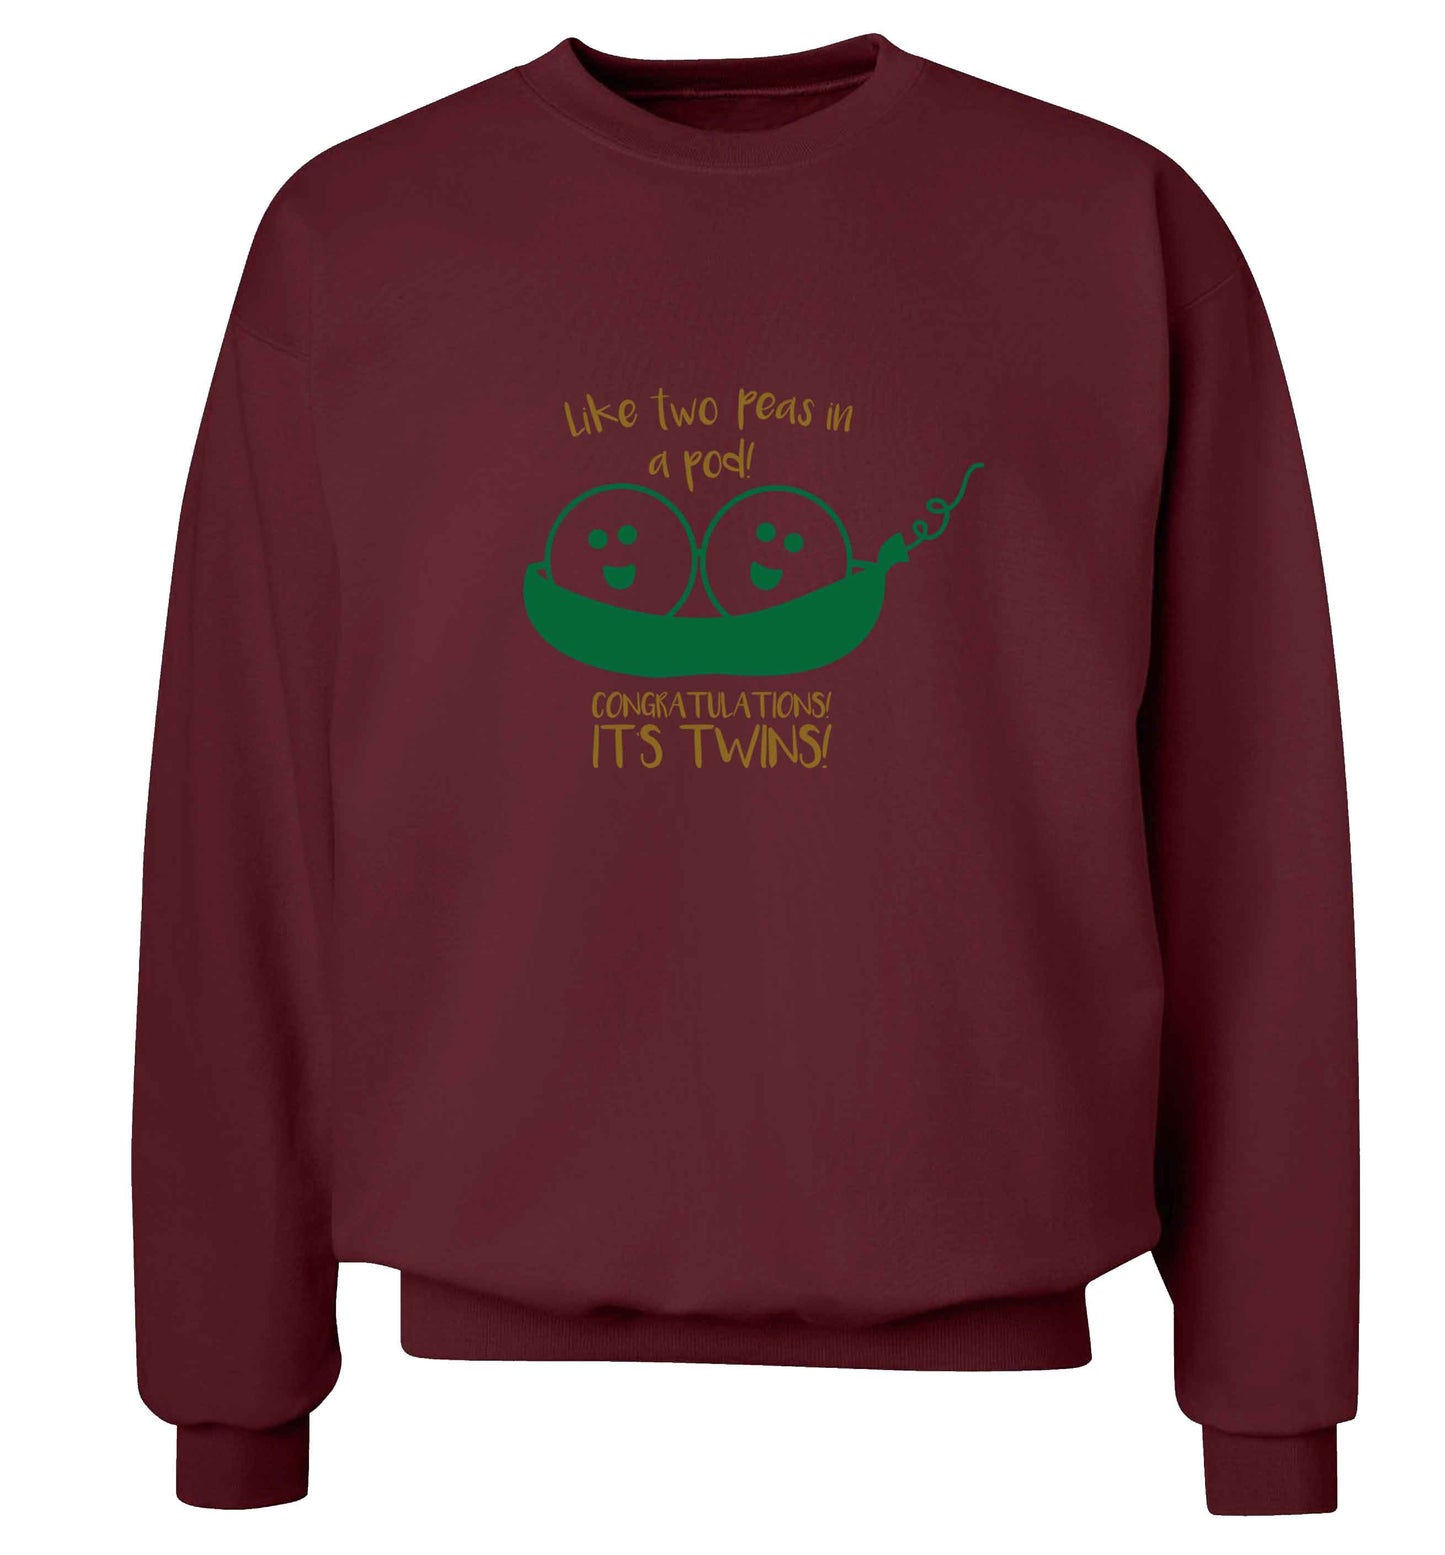 Like two peas in a pod! Congratulations it's twins! adult's unisex maroon sweater 2XL